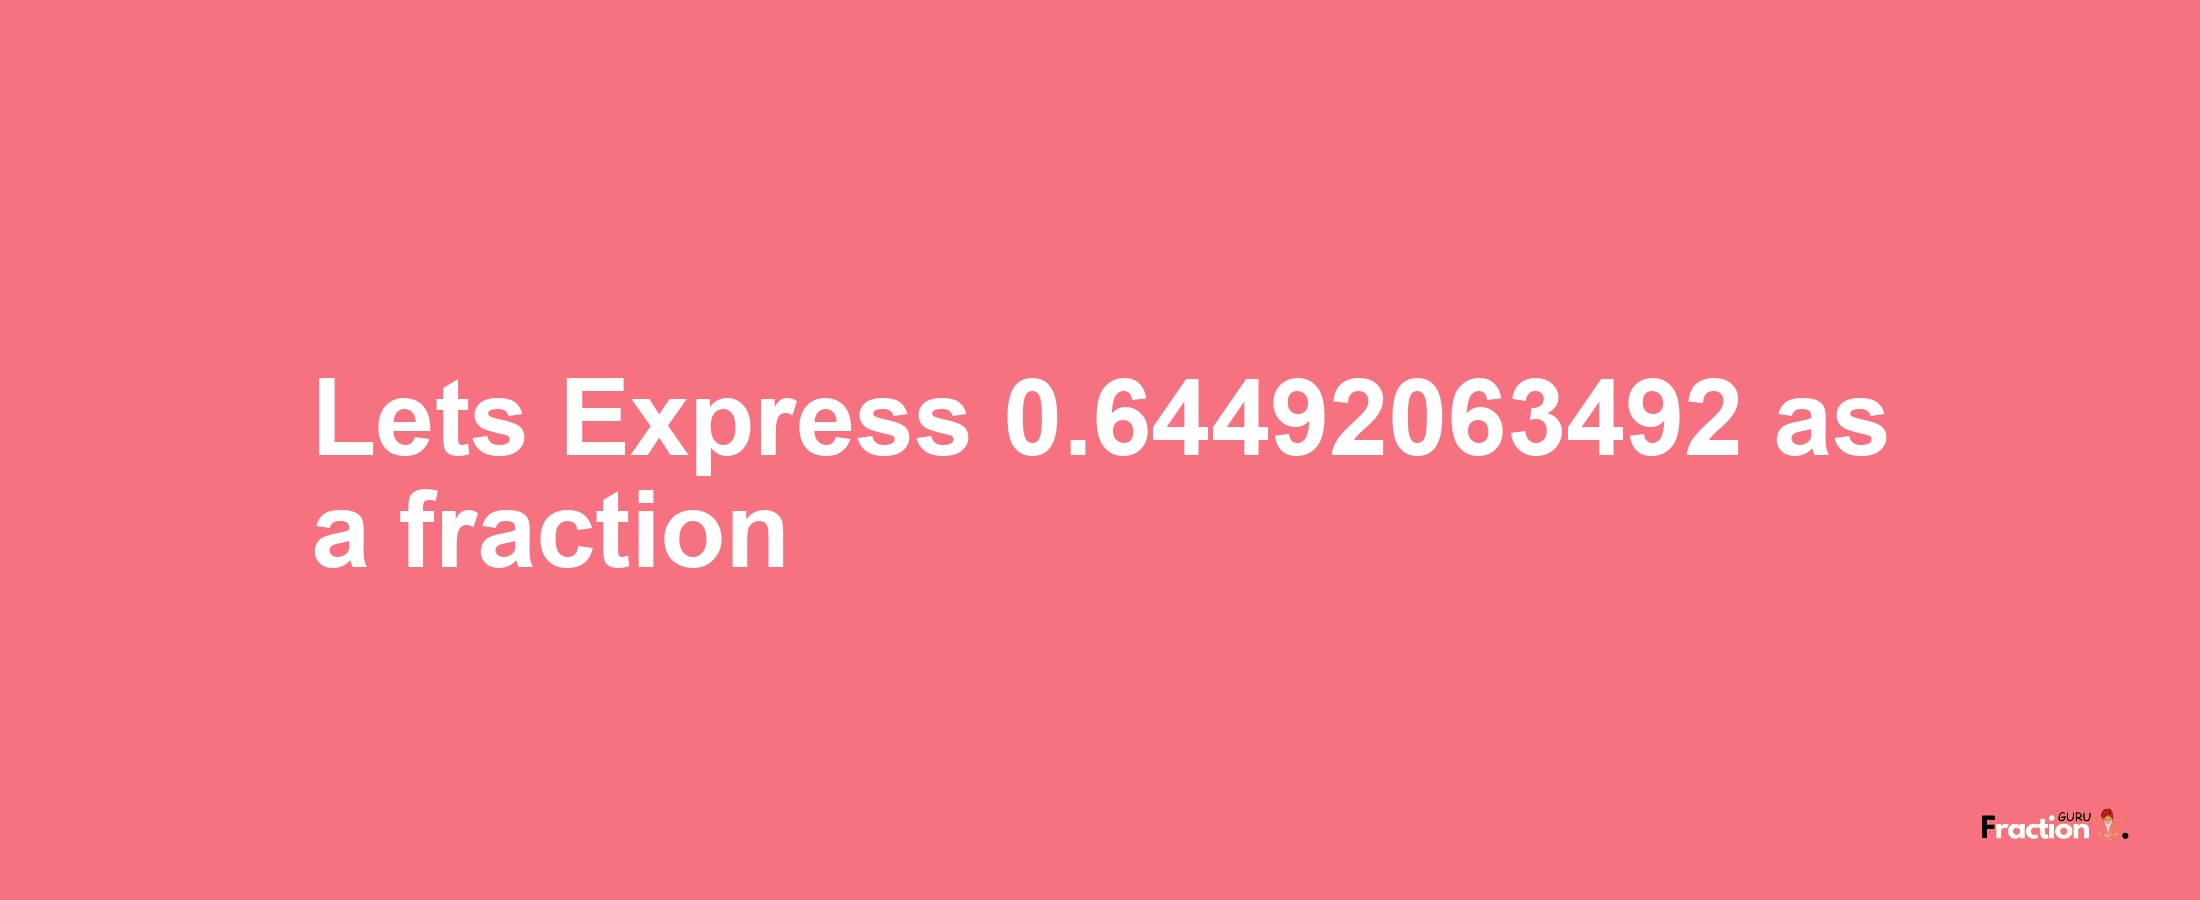 Lets Express 0.64492063492 as afraction